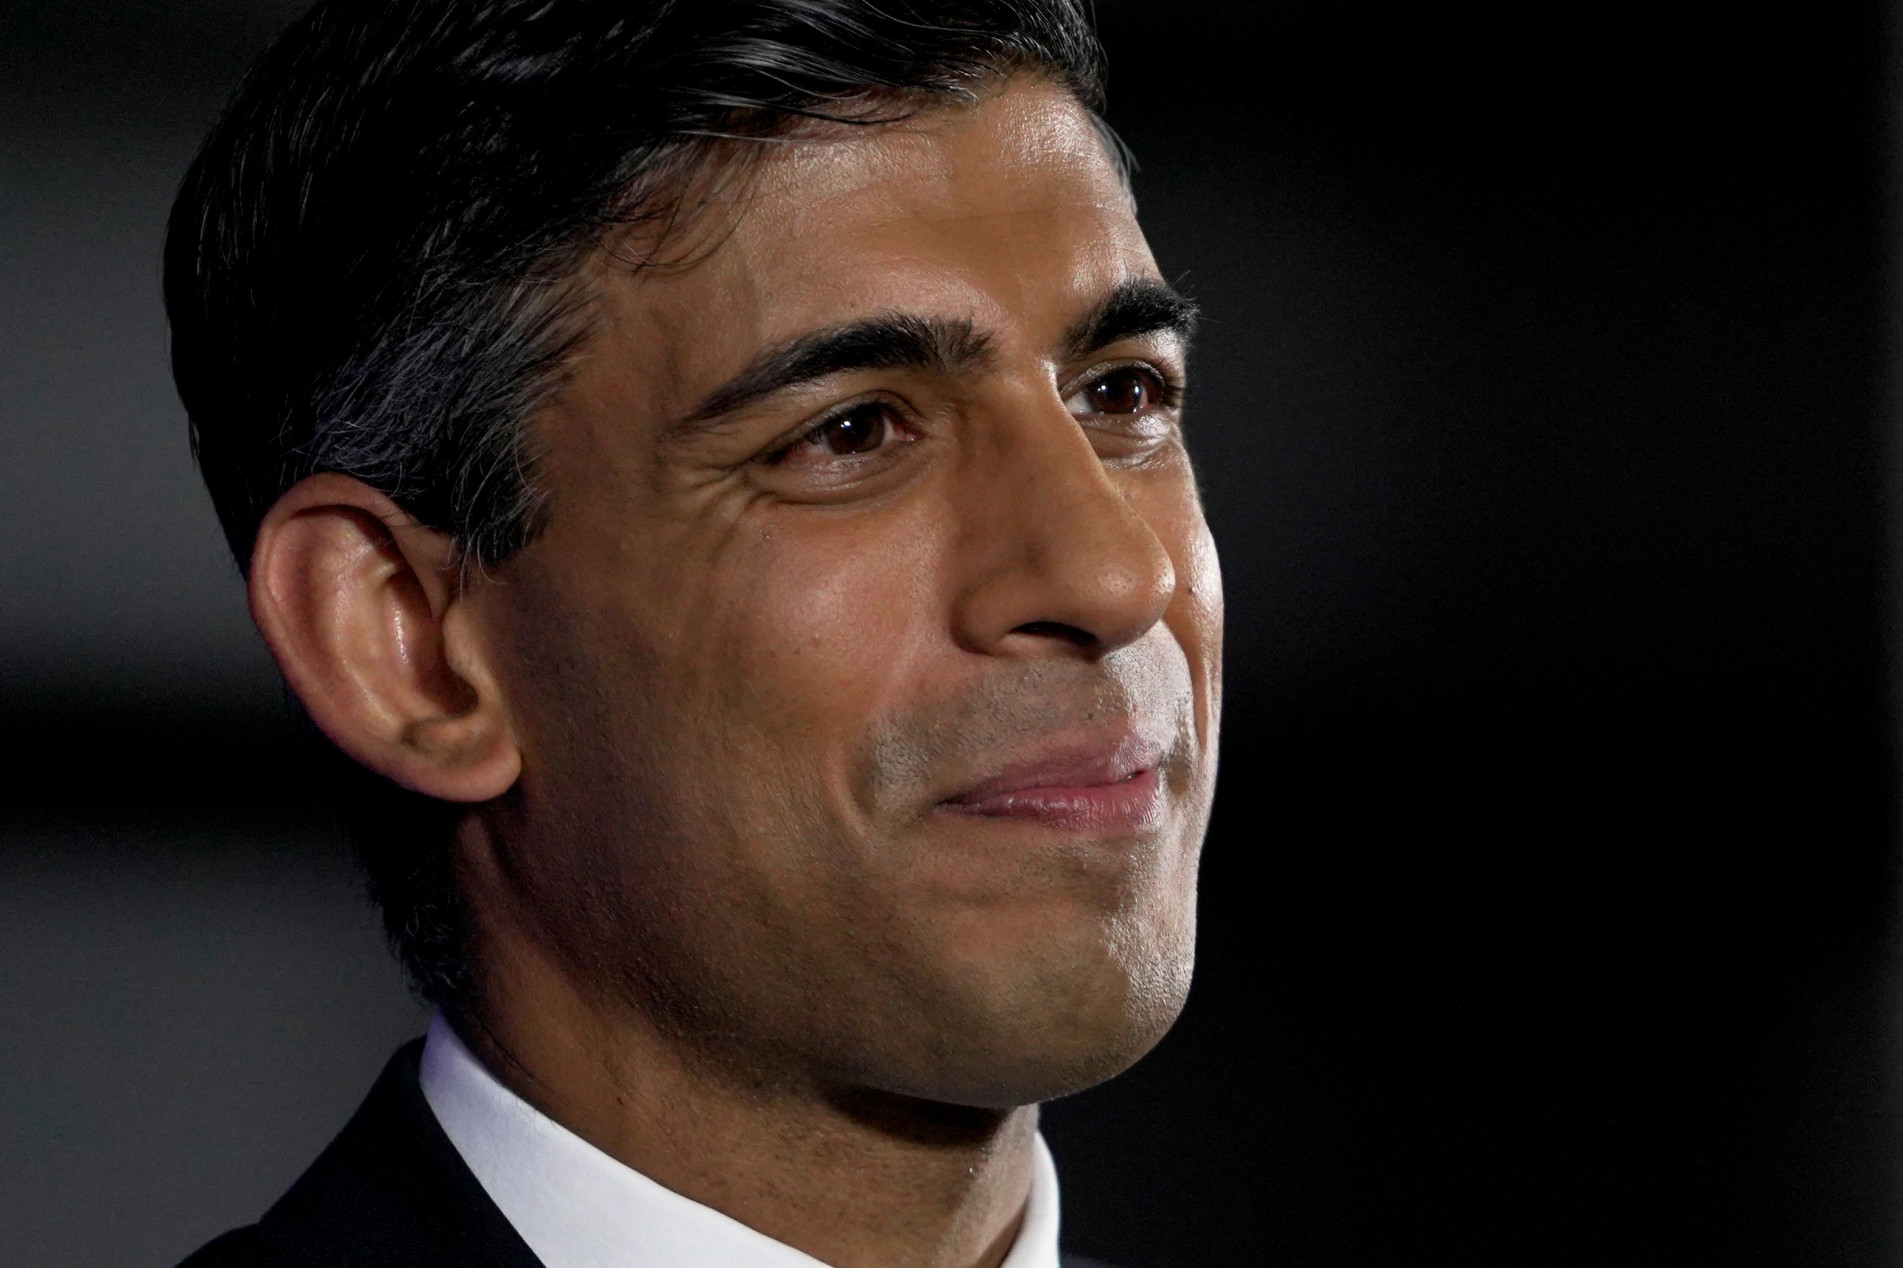  Rishi Sunak, Britain's former chancellor of the exchequer and candidate to become the next prime minister, delivers a speech at the Queen Elizabeth II Centre in London on July 12, 2022. The new UK prime minister to replace the outgoing Boris Johnson will be announced on September 5, the ruling Conservative party said, with 11 hopefuls currently vying for the job. (Photo by Niklas HALLE'N / AFP)

      